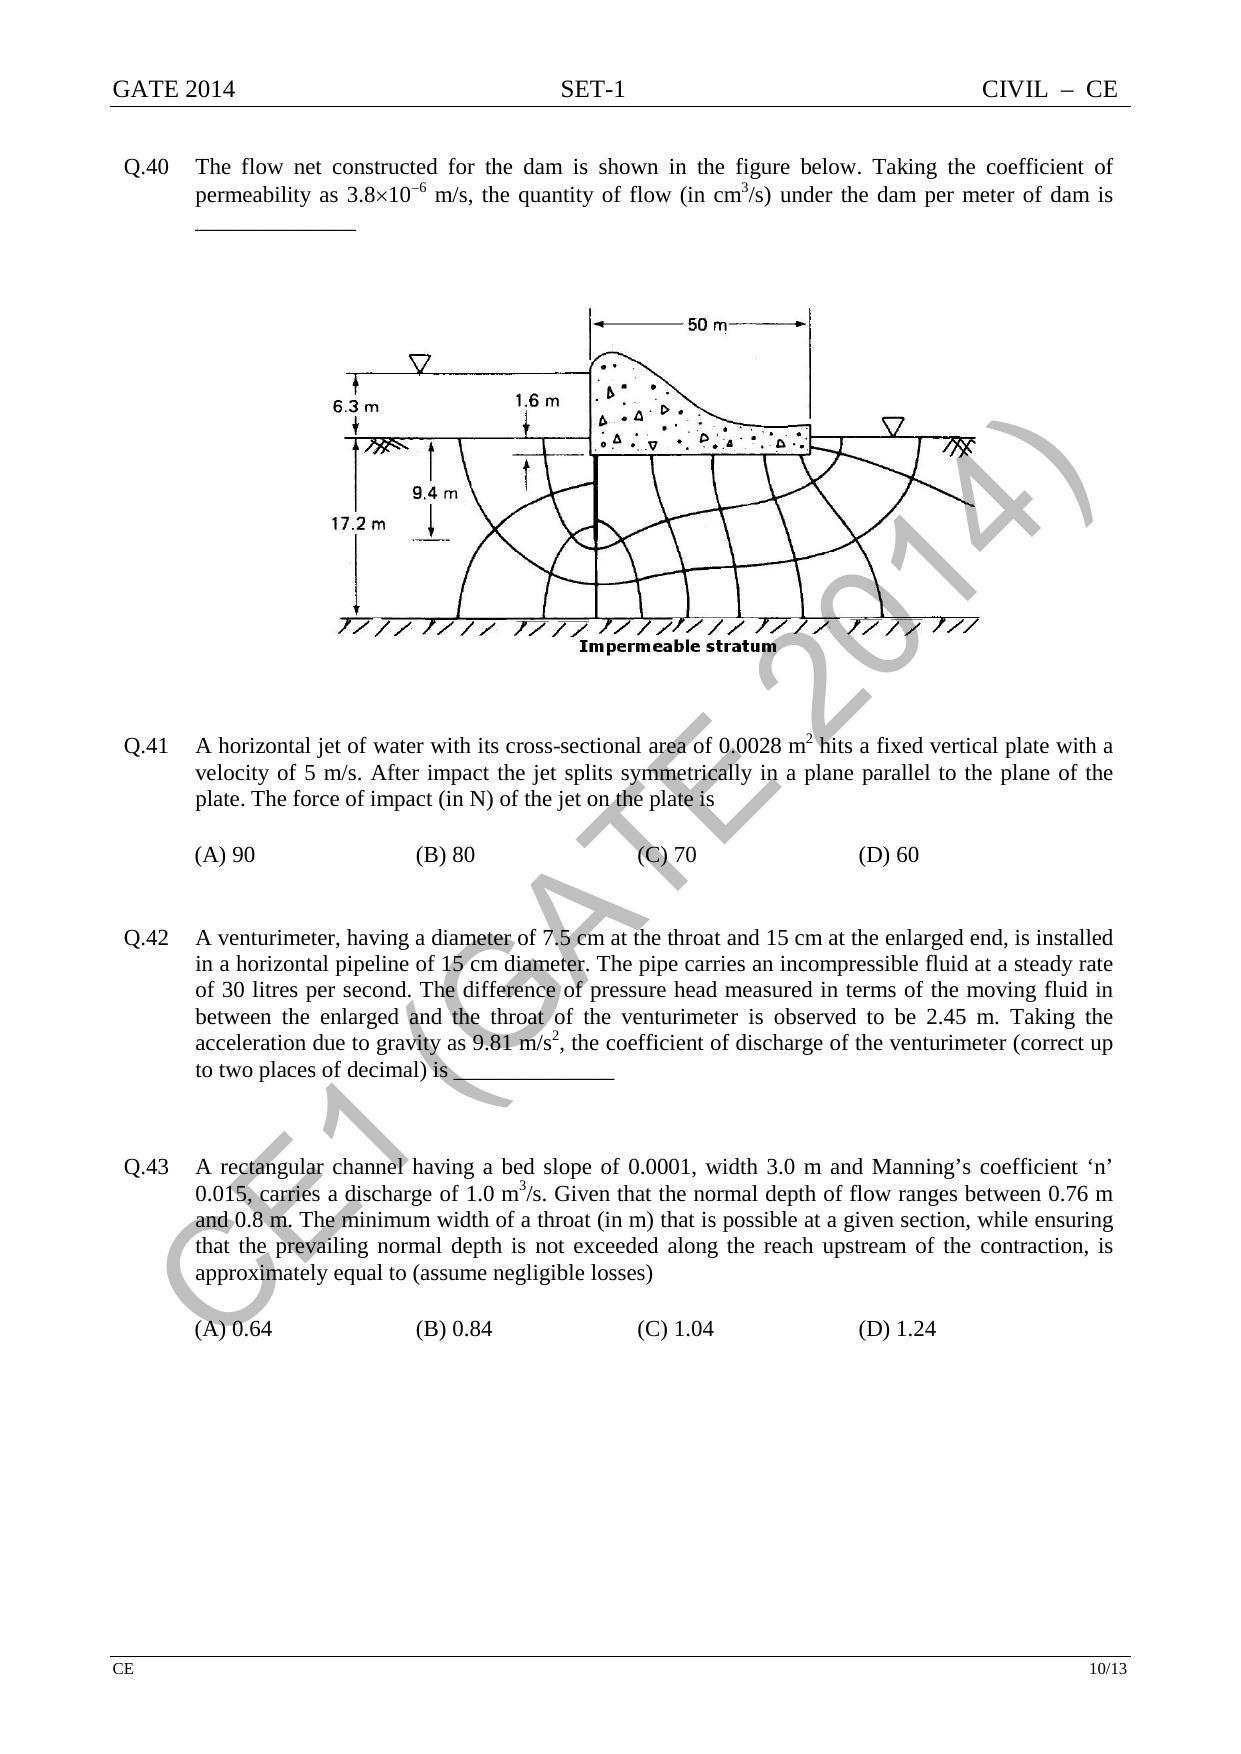 GATE 2014 Civil Engineering (CE) Question Paper with Answer Key - Page 17